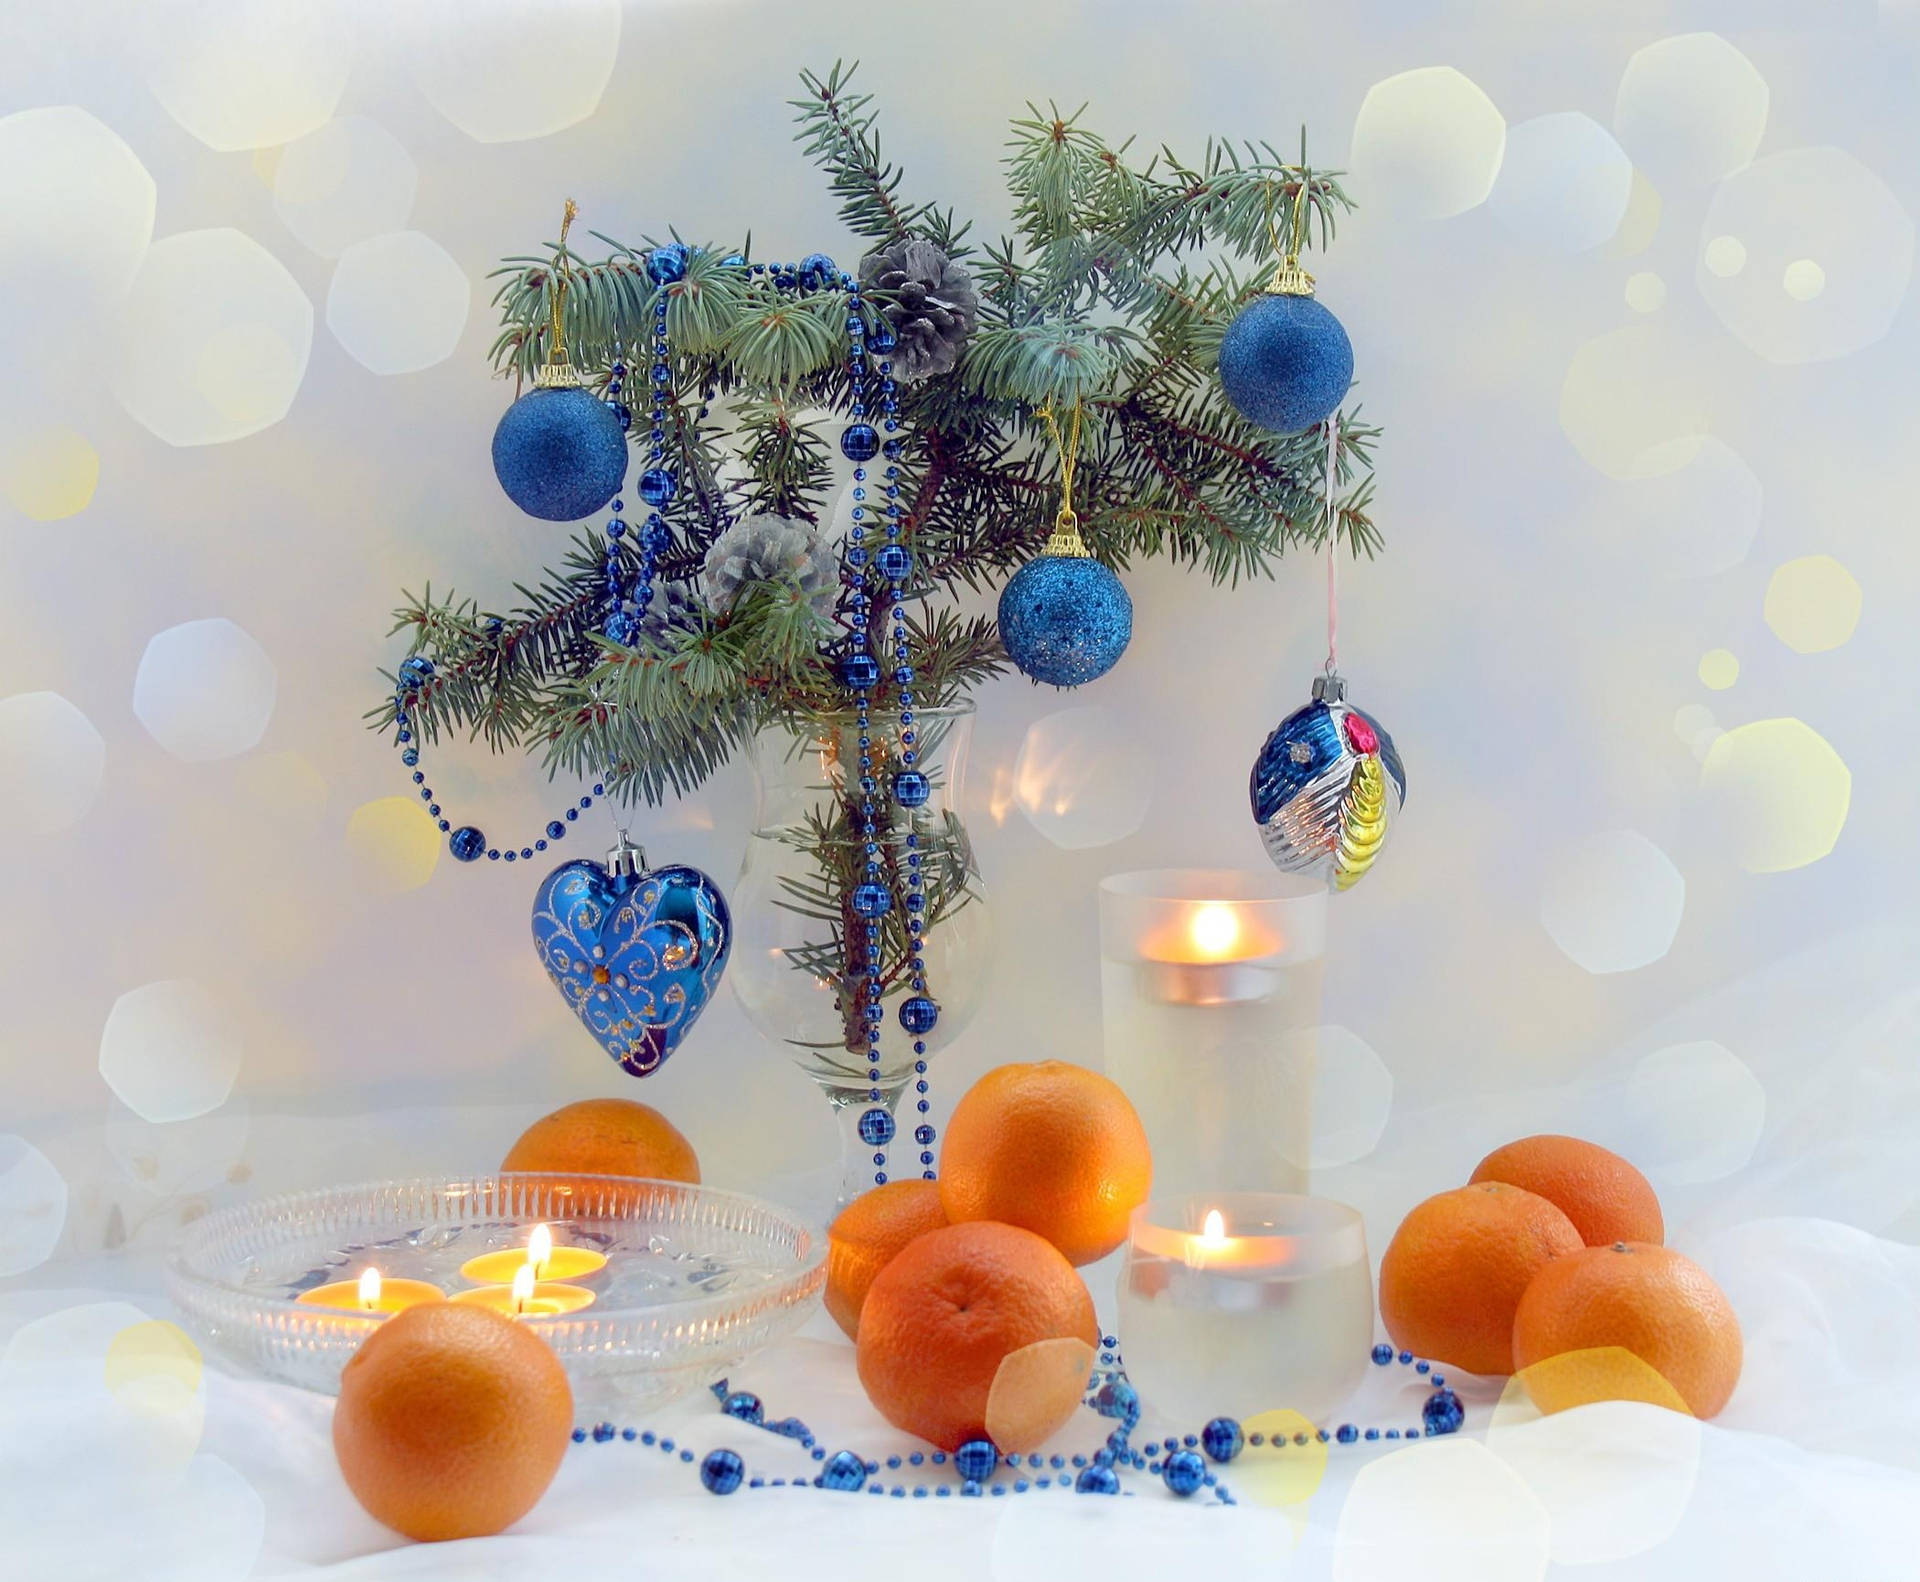 New Year's Decorations With Candles And Tangerines